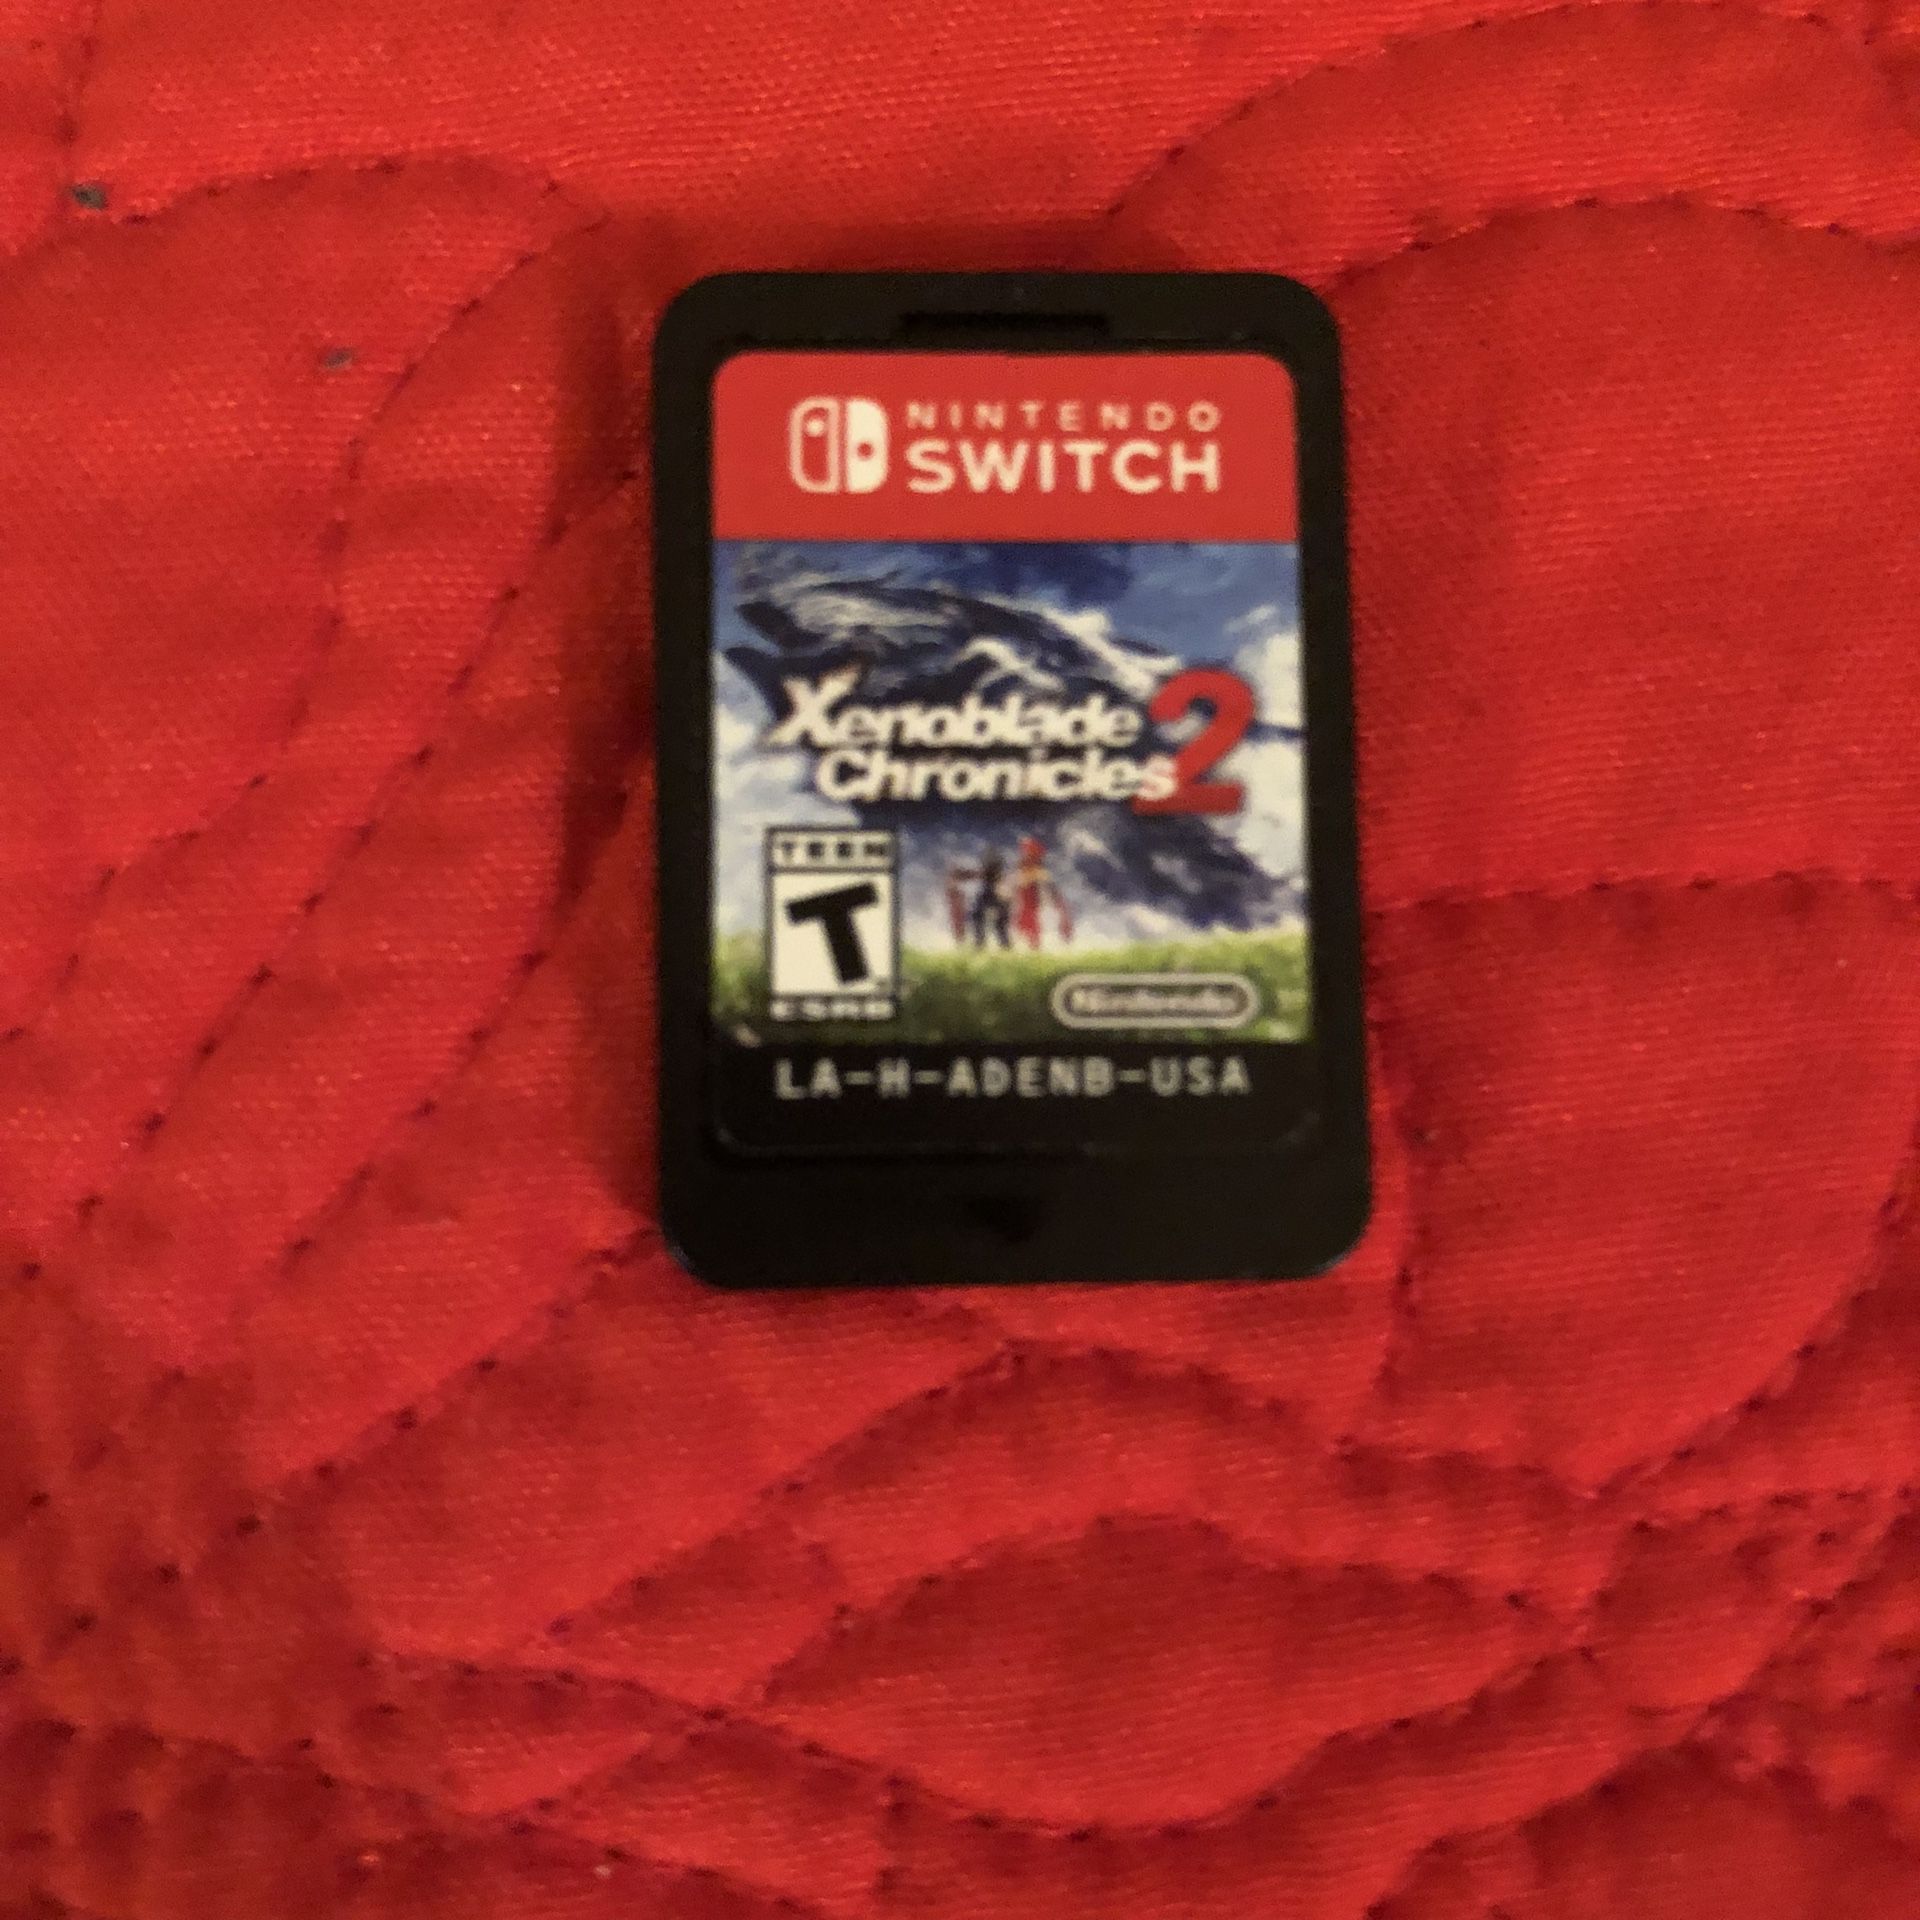 2 Nintendo switch games Xenoblade2 and Nightmares